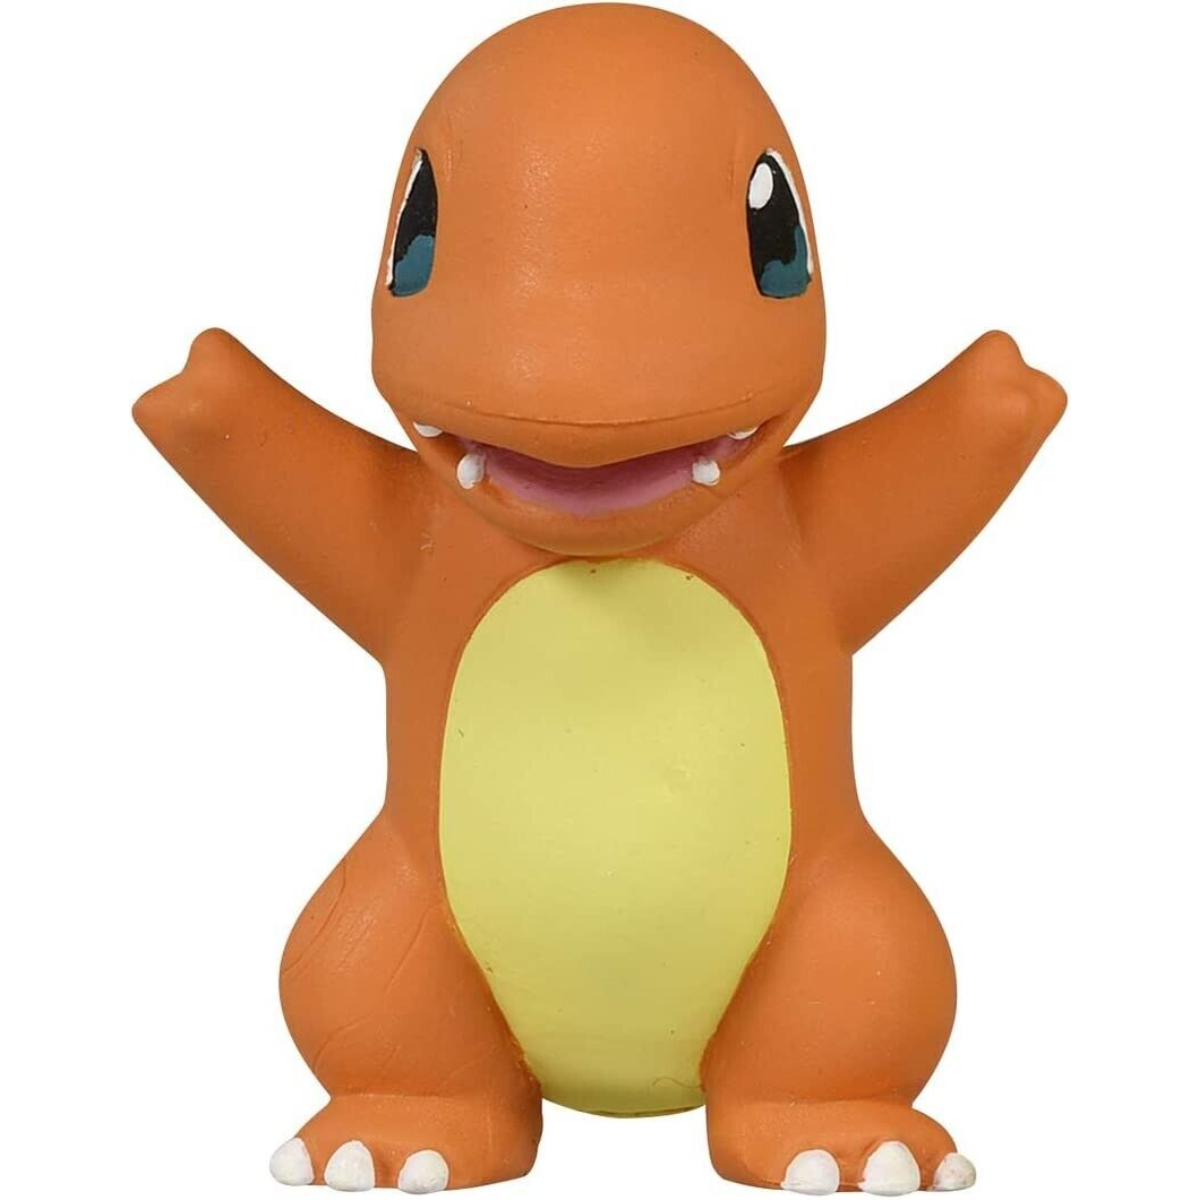 Pokemon Moncolle &quot;Charmander&quot; (MS-12)-Takara Tomy-Ace Cards &amp; Collectibles